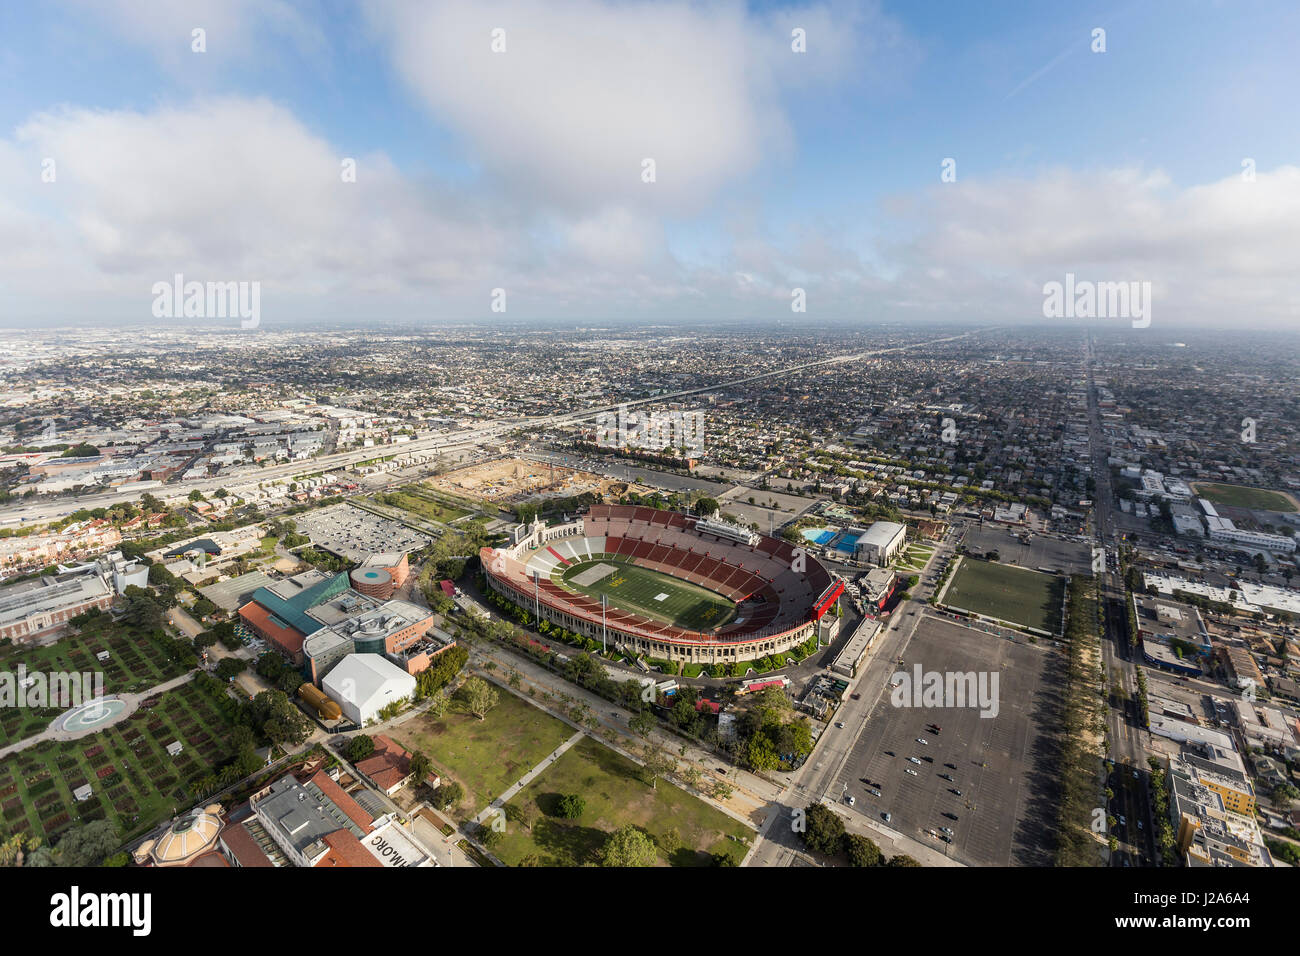 Los Angeles, California, USA - April 12, 2017:  Aerial view of the historic Coliseum with afternoon clouds. Stock Photo